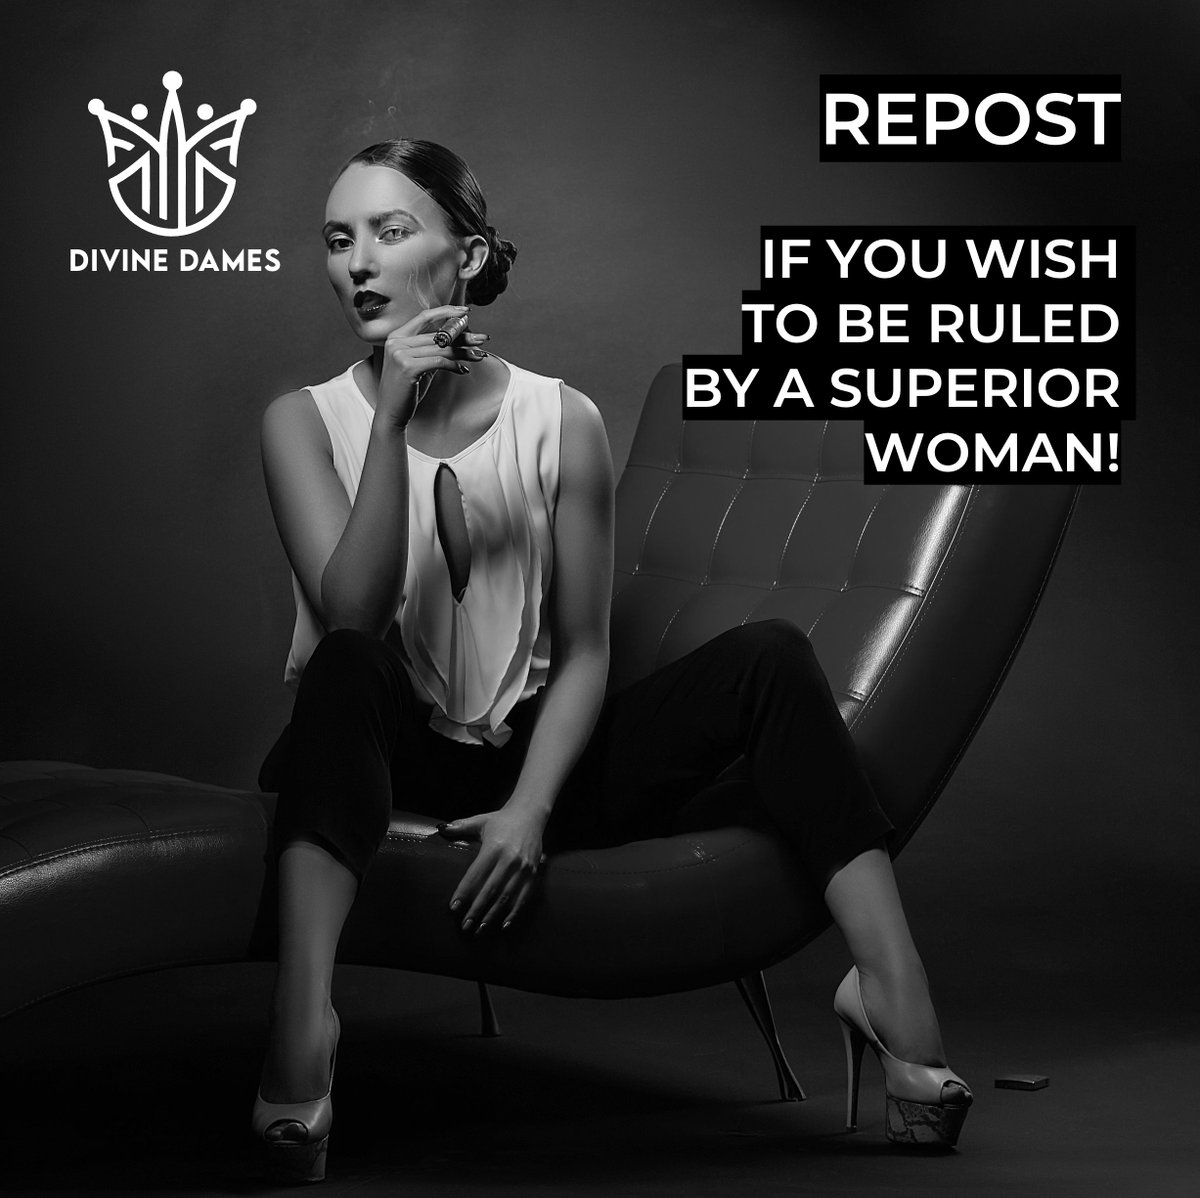 REPOST if you wish to be ruled by a superior woman who knows what she wants and isn't afraid to take charge.